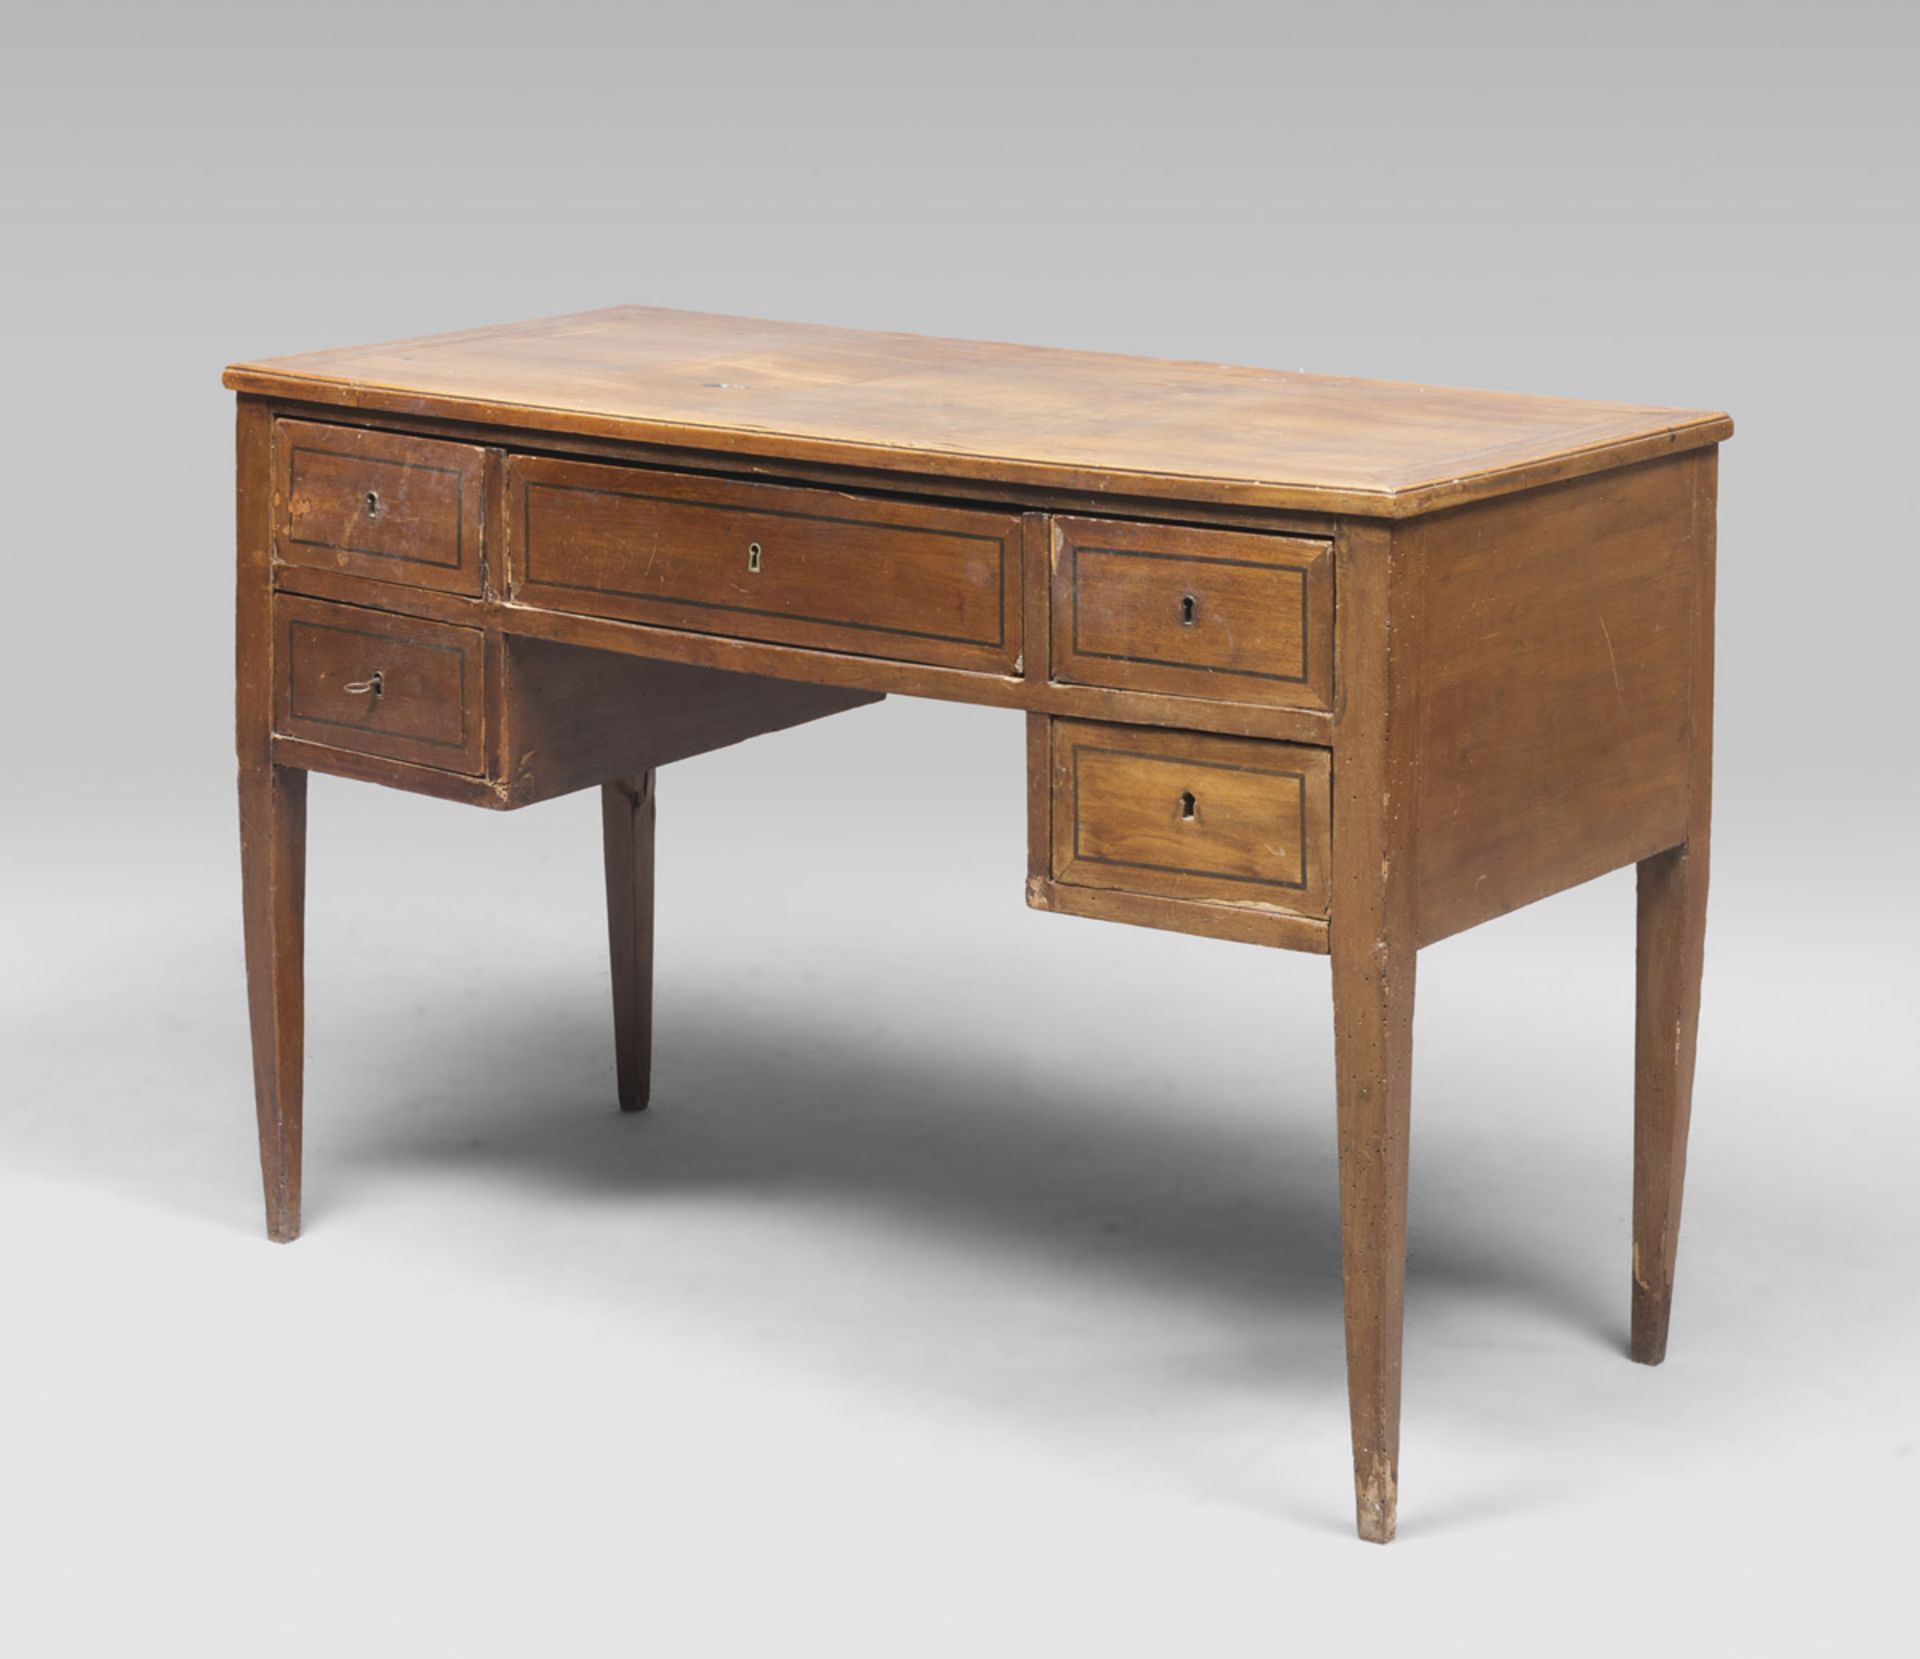 CHERRY-WOOD DESK, CENTRAL ITALY EARLY 19TH CENTURY with violet ebony edgings. Rectangular top,